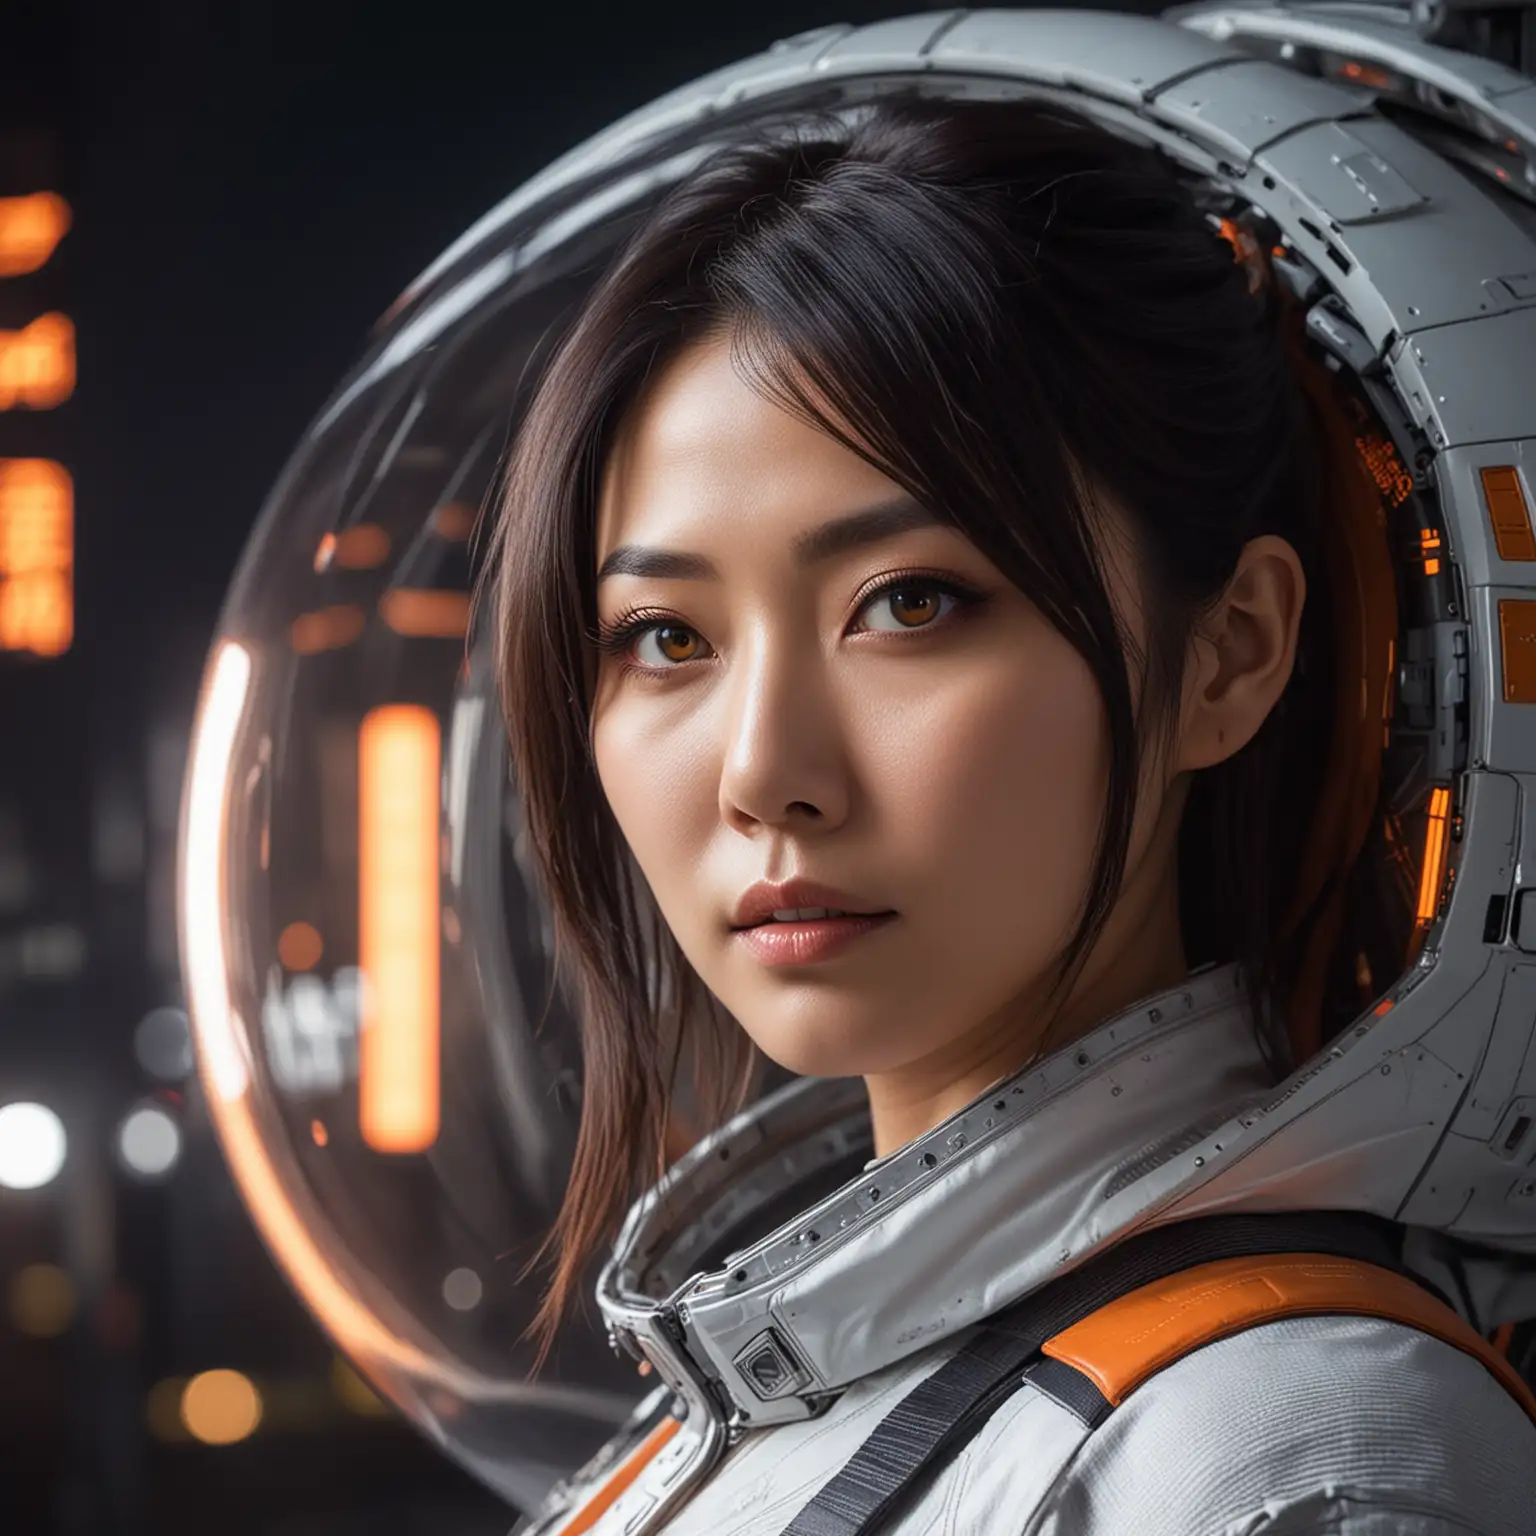 A sultry eastern woman, 35 years old, confident look, orange eyes, with futuristic japanese style, in a spaceship over a dark city